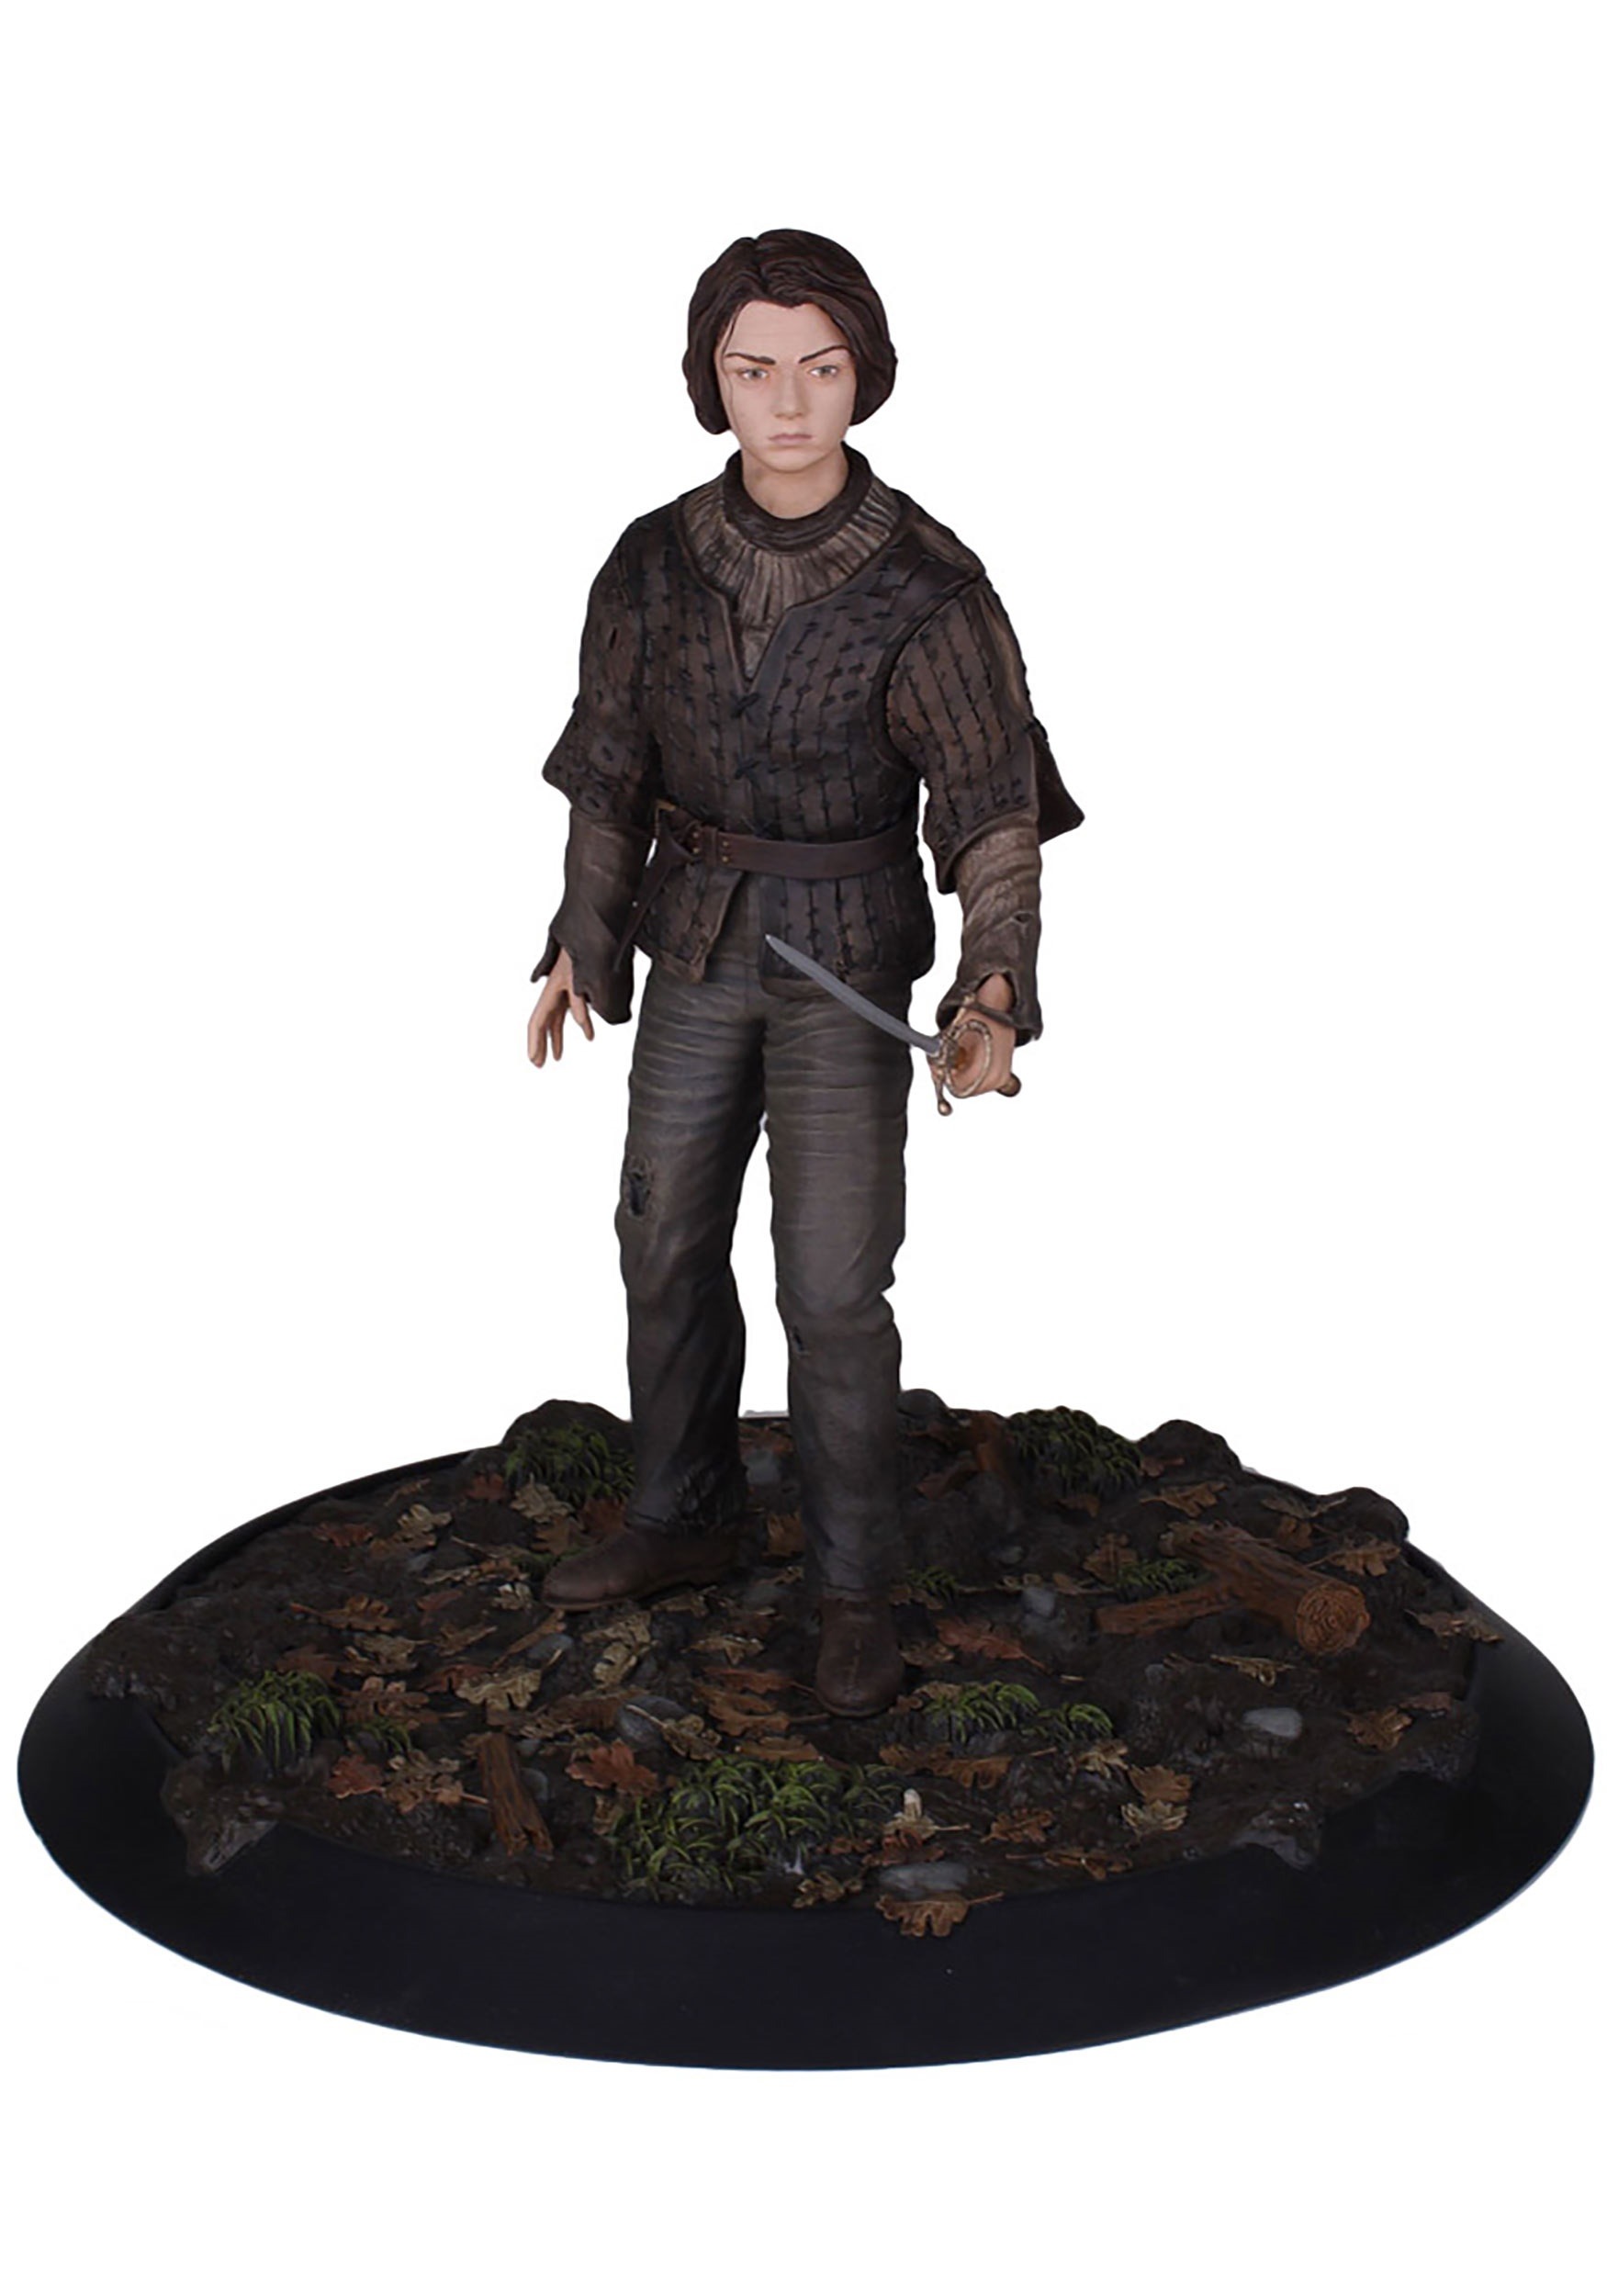 Arya Stark Collectible Statue from Game of Thrones